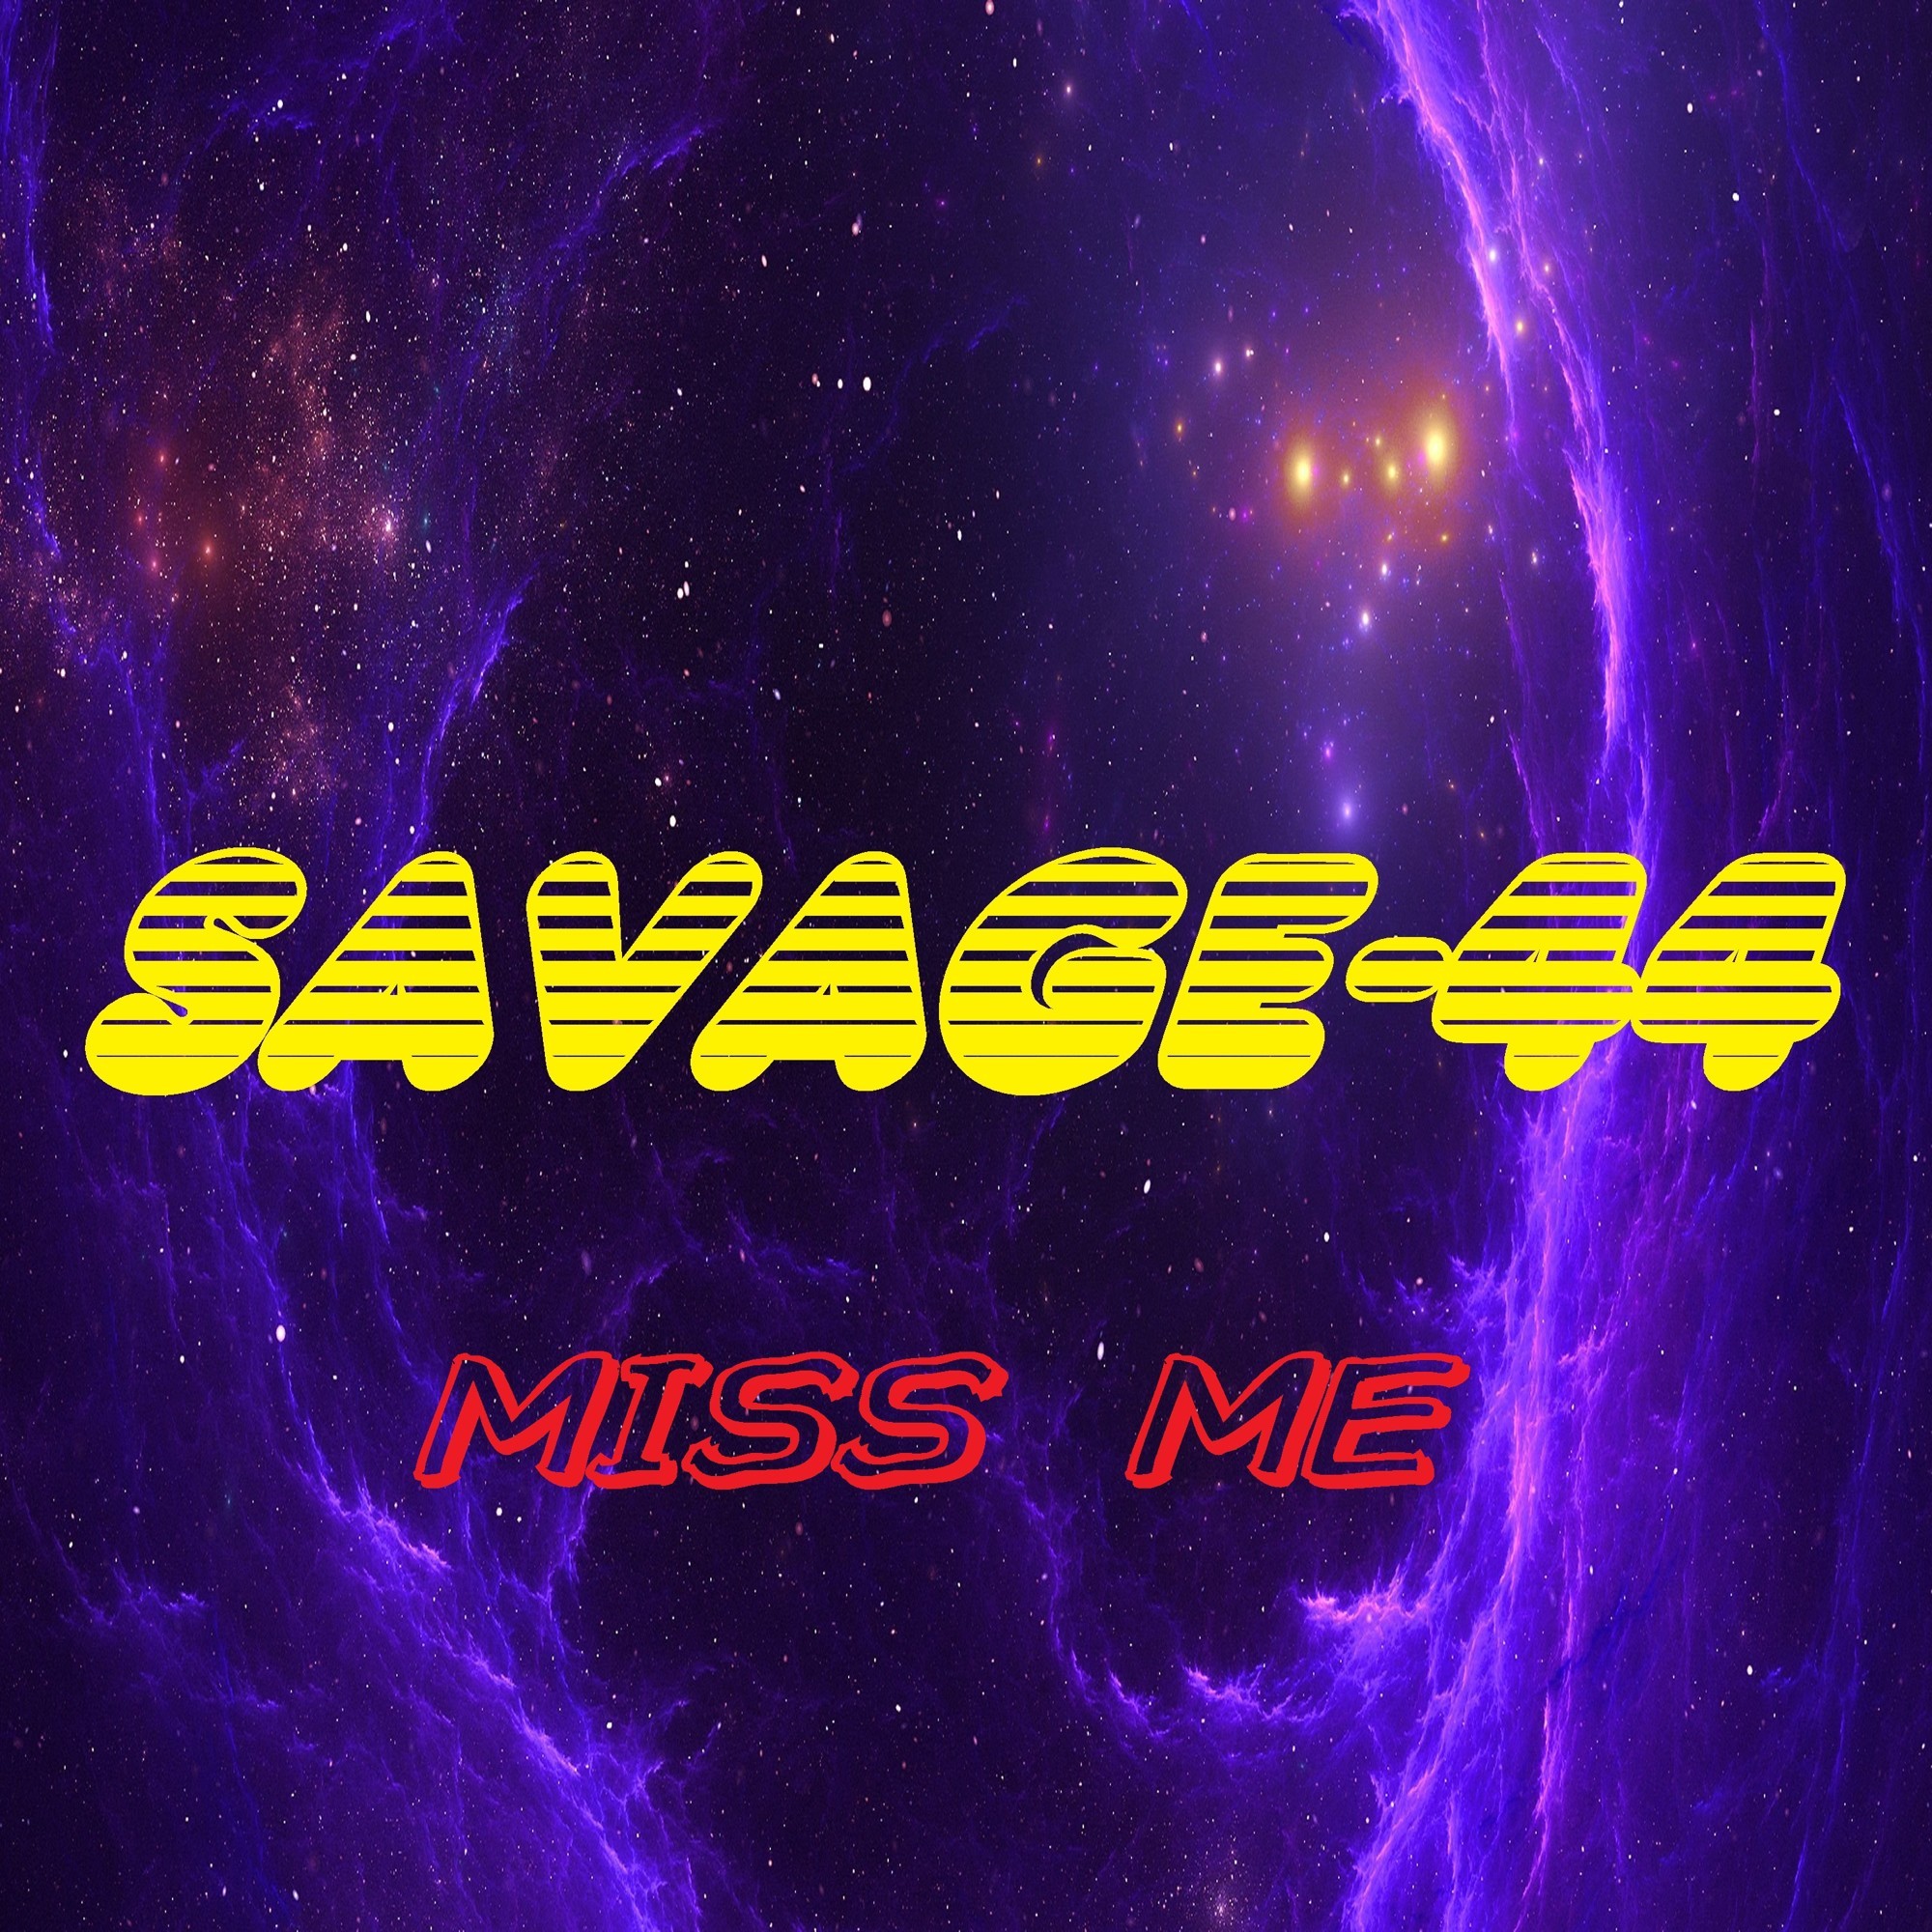 Savage 44 the music ring new